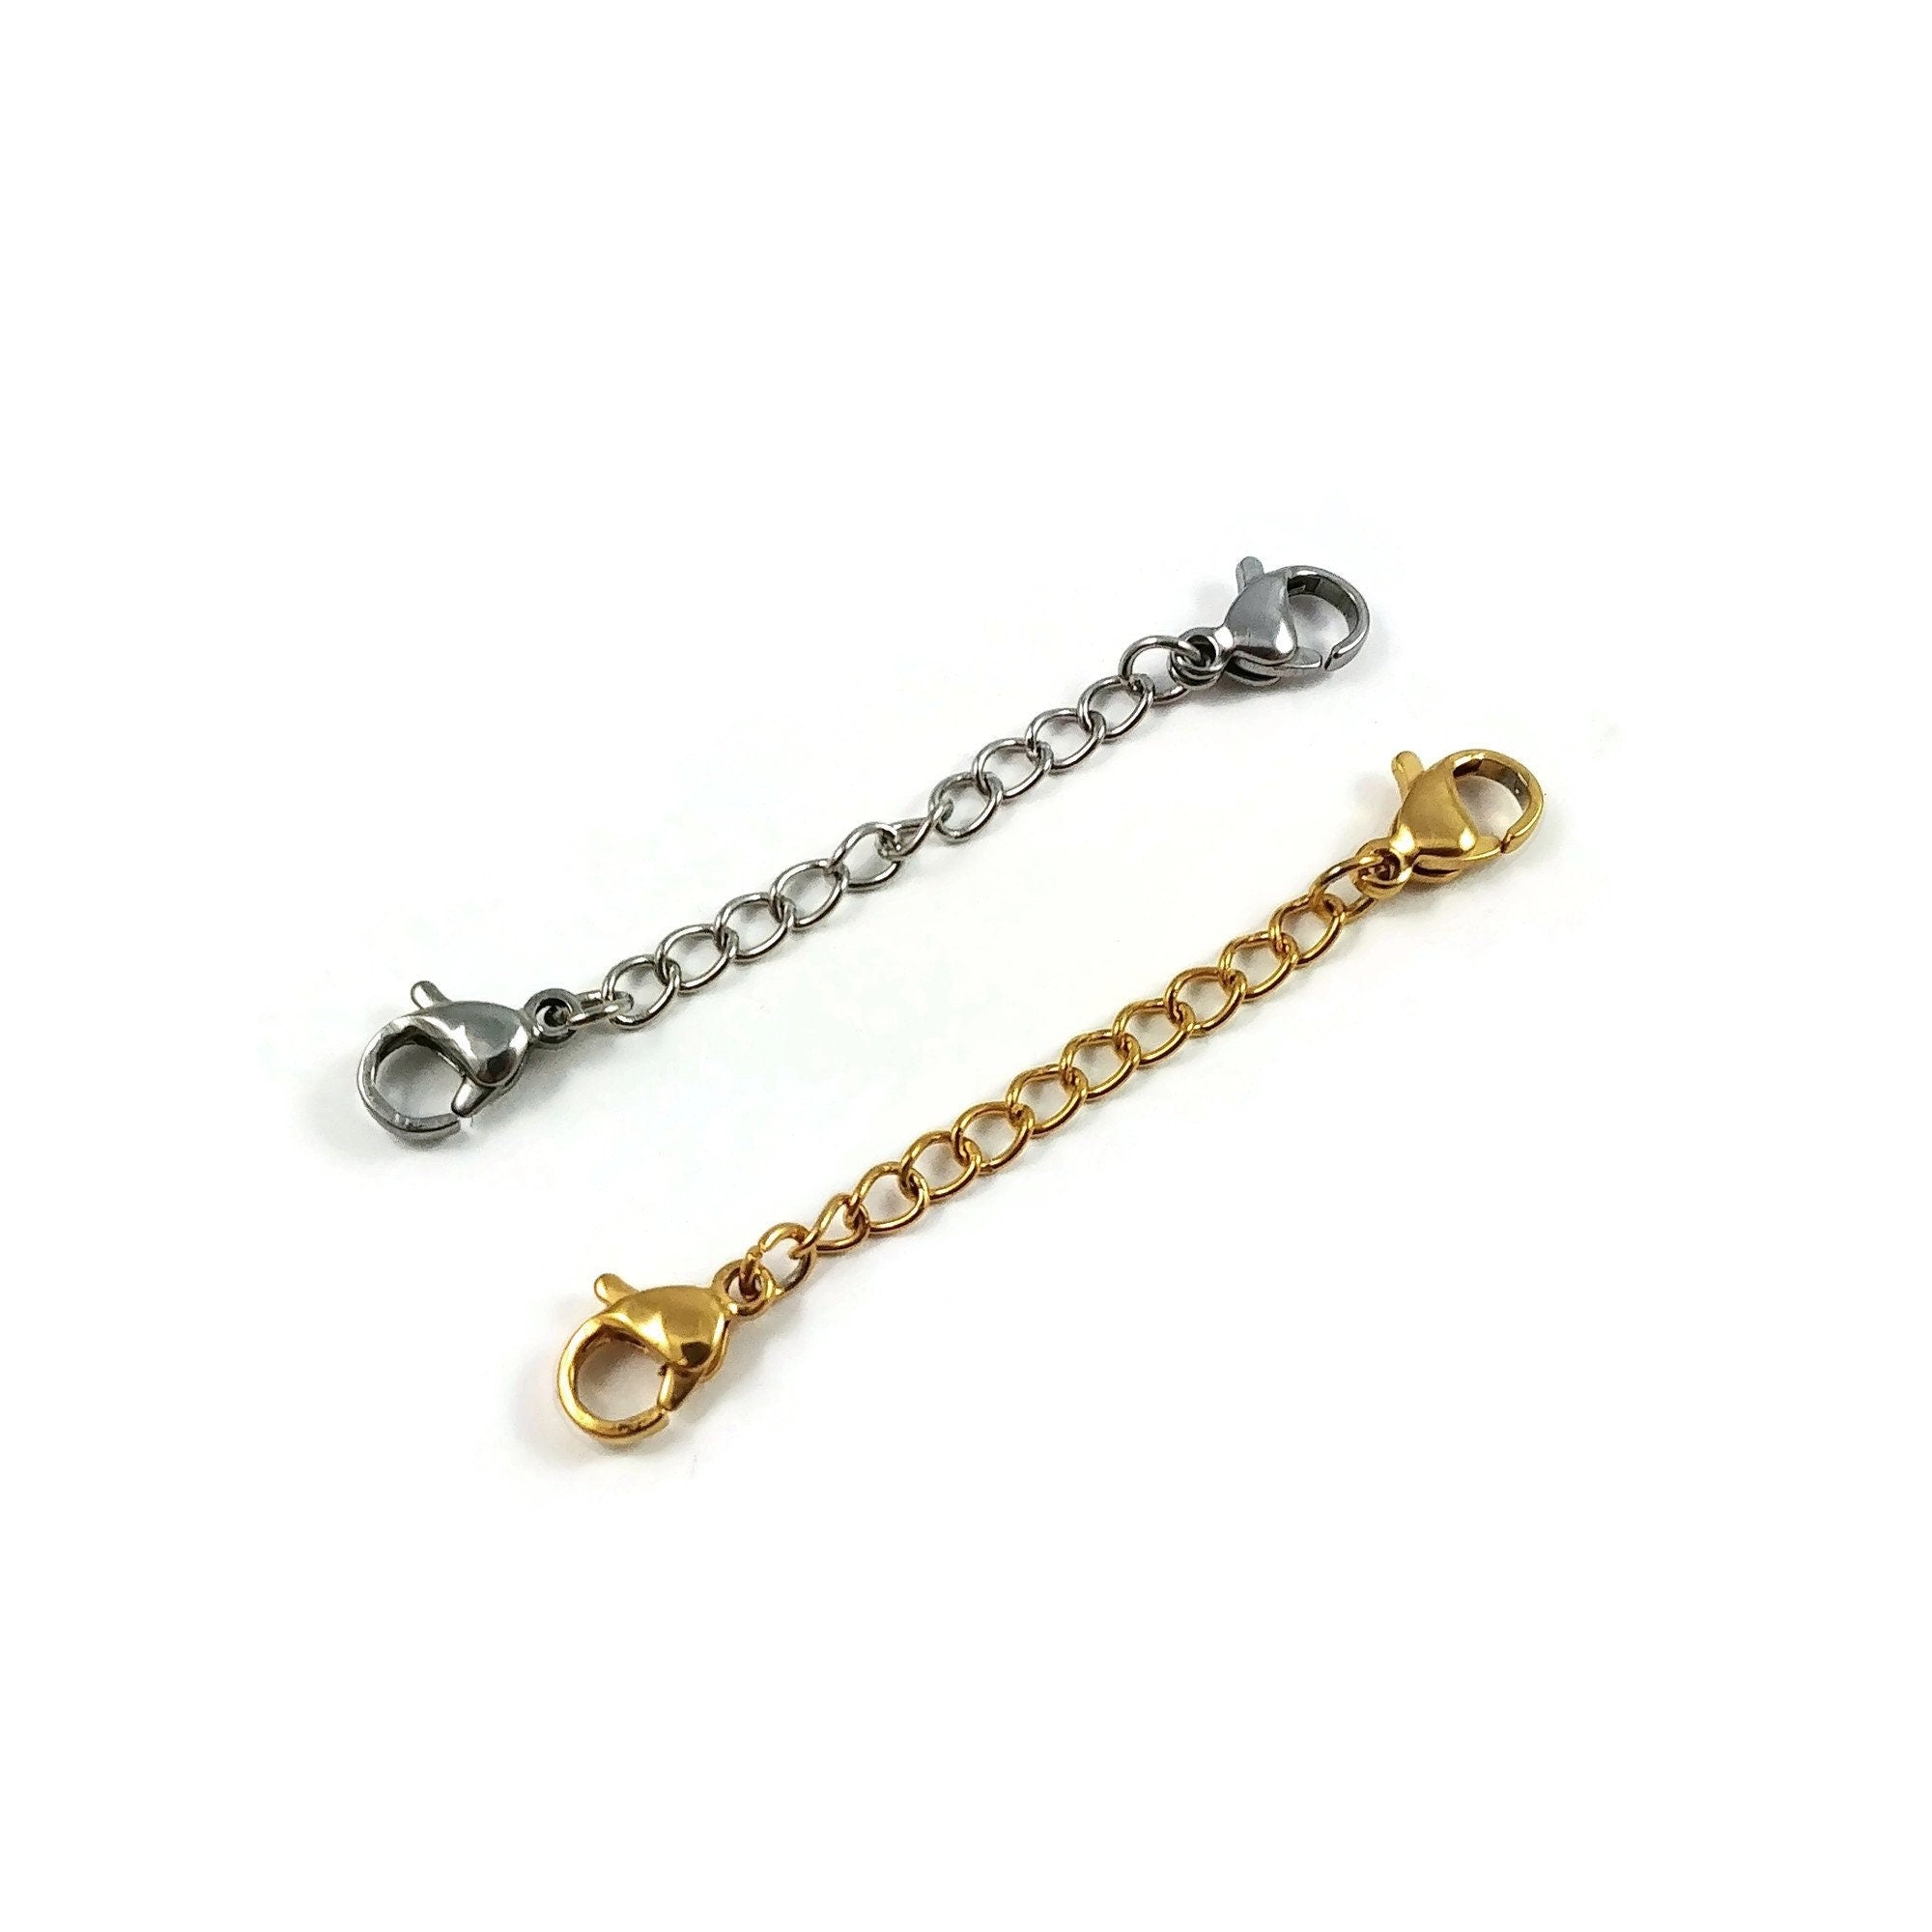 Micro Traders 3pcs Necklace Extender Chain Spring Clasp Chain Extensions for Necklaces Bracelet Jewellery Making 18K Gold Plated Over 925 Sterling